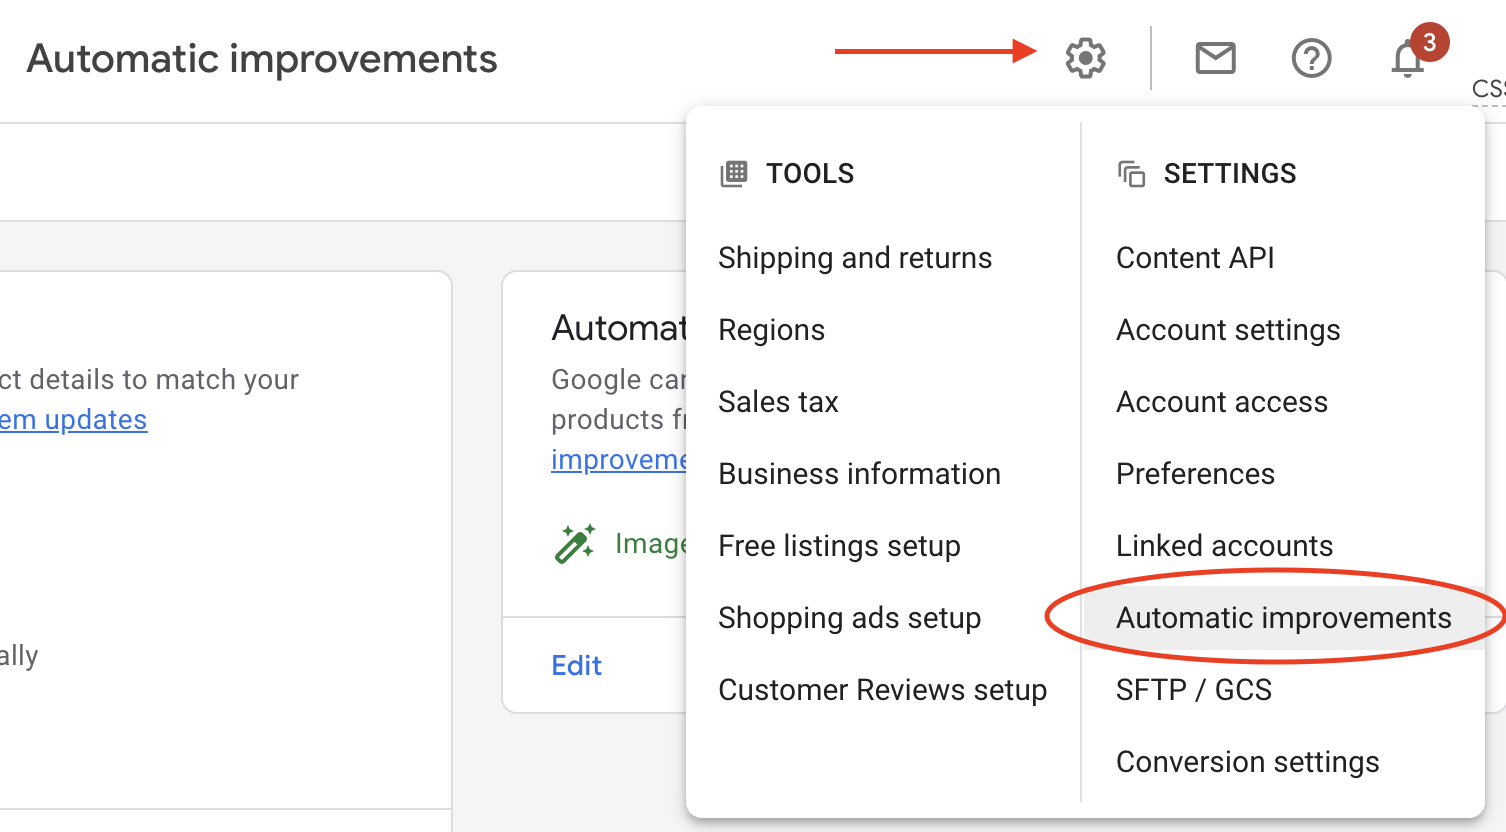 Annotated screen shot of where to access Automatic improvements in the Google Merchant Center interface